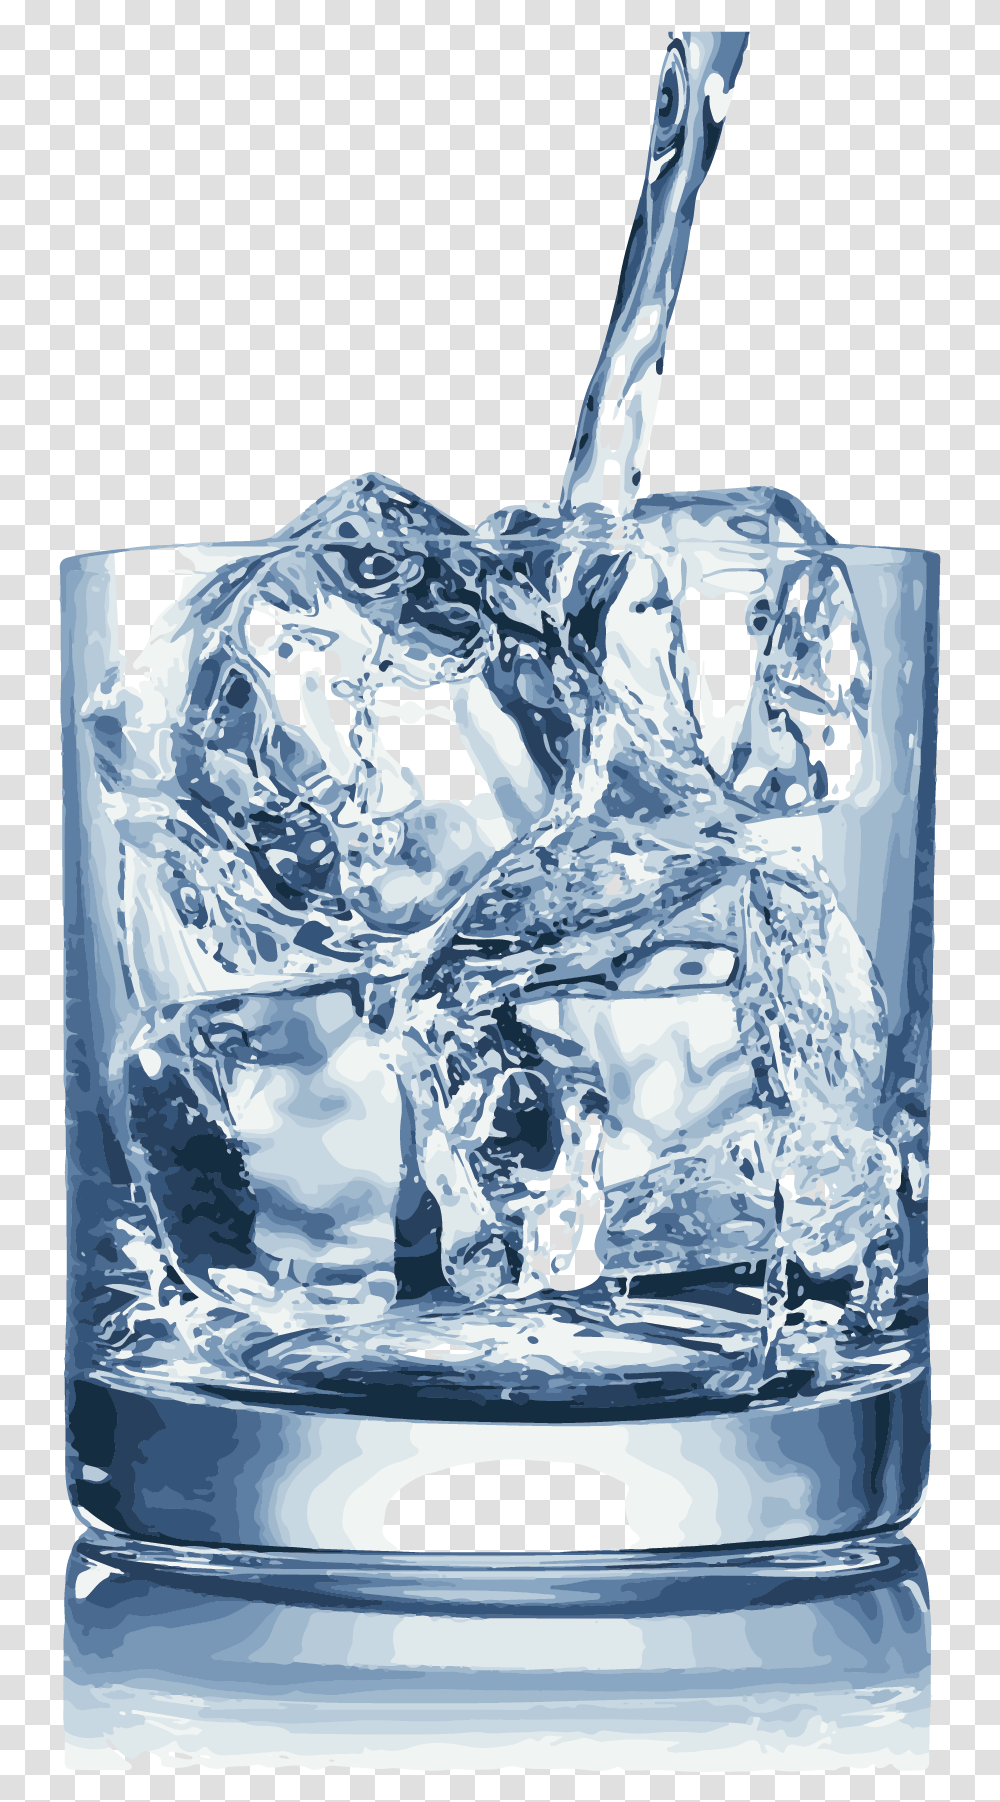 Cups And Ice Transprent Free Download Cup Of Ice Cubes, Outdoors, Nature, Snow, Frost Transparent Png